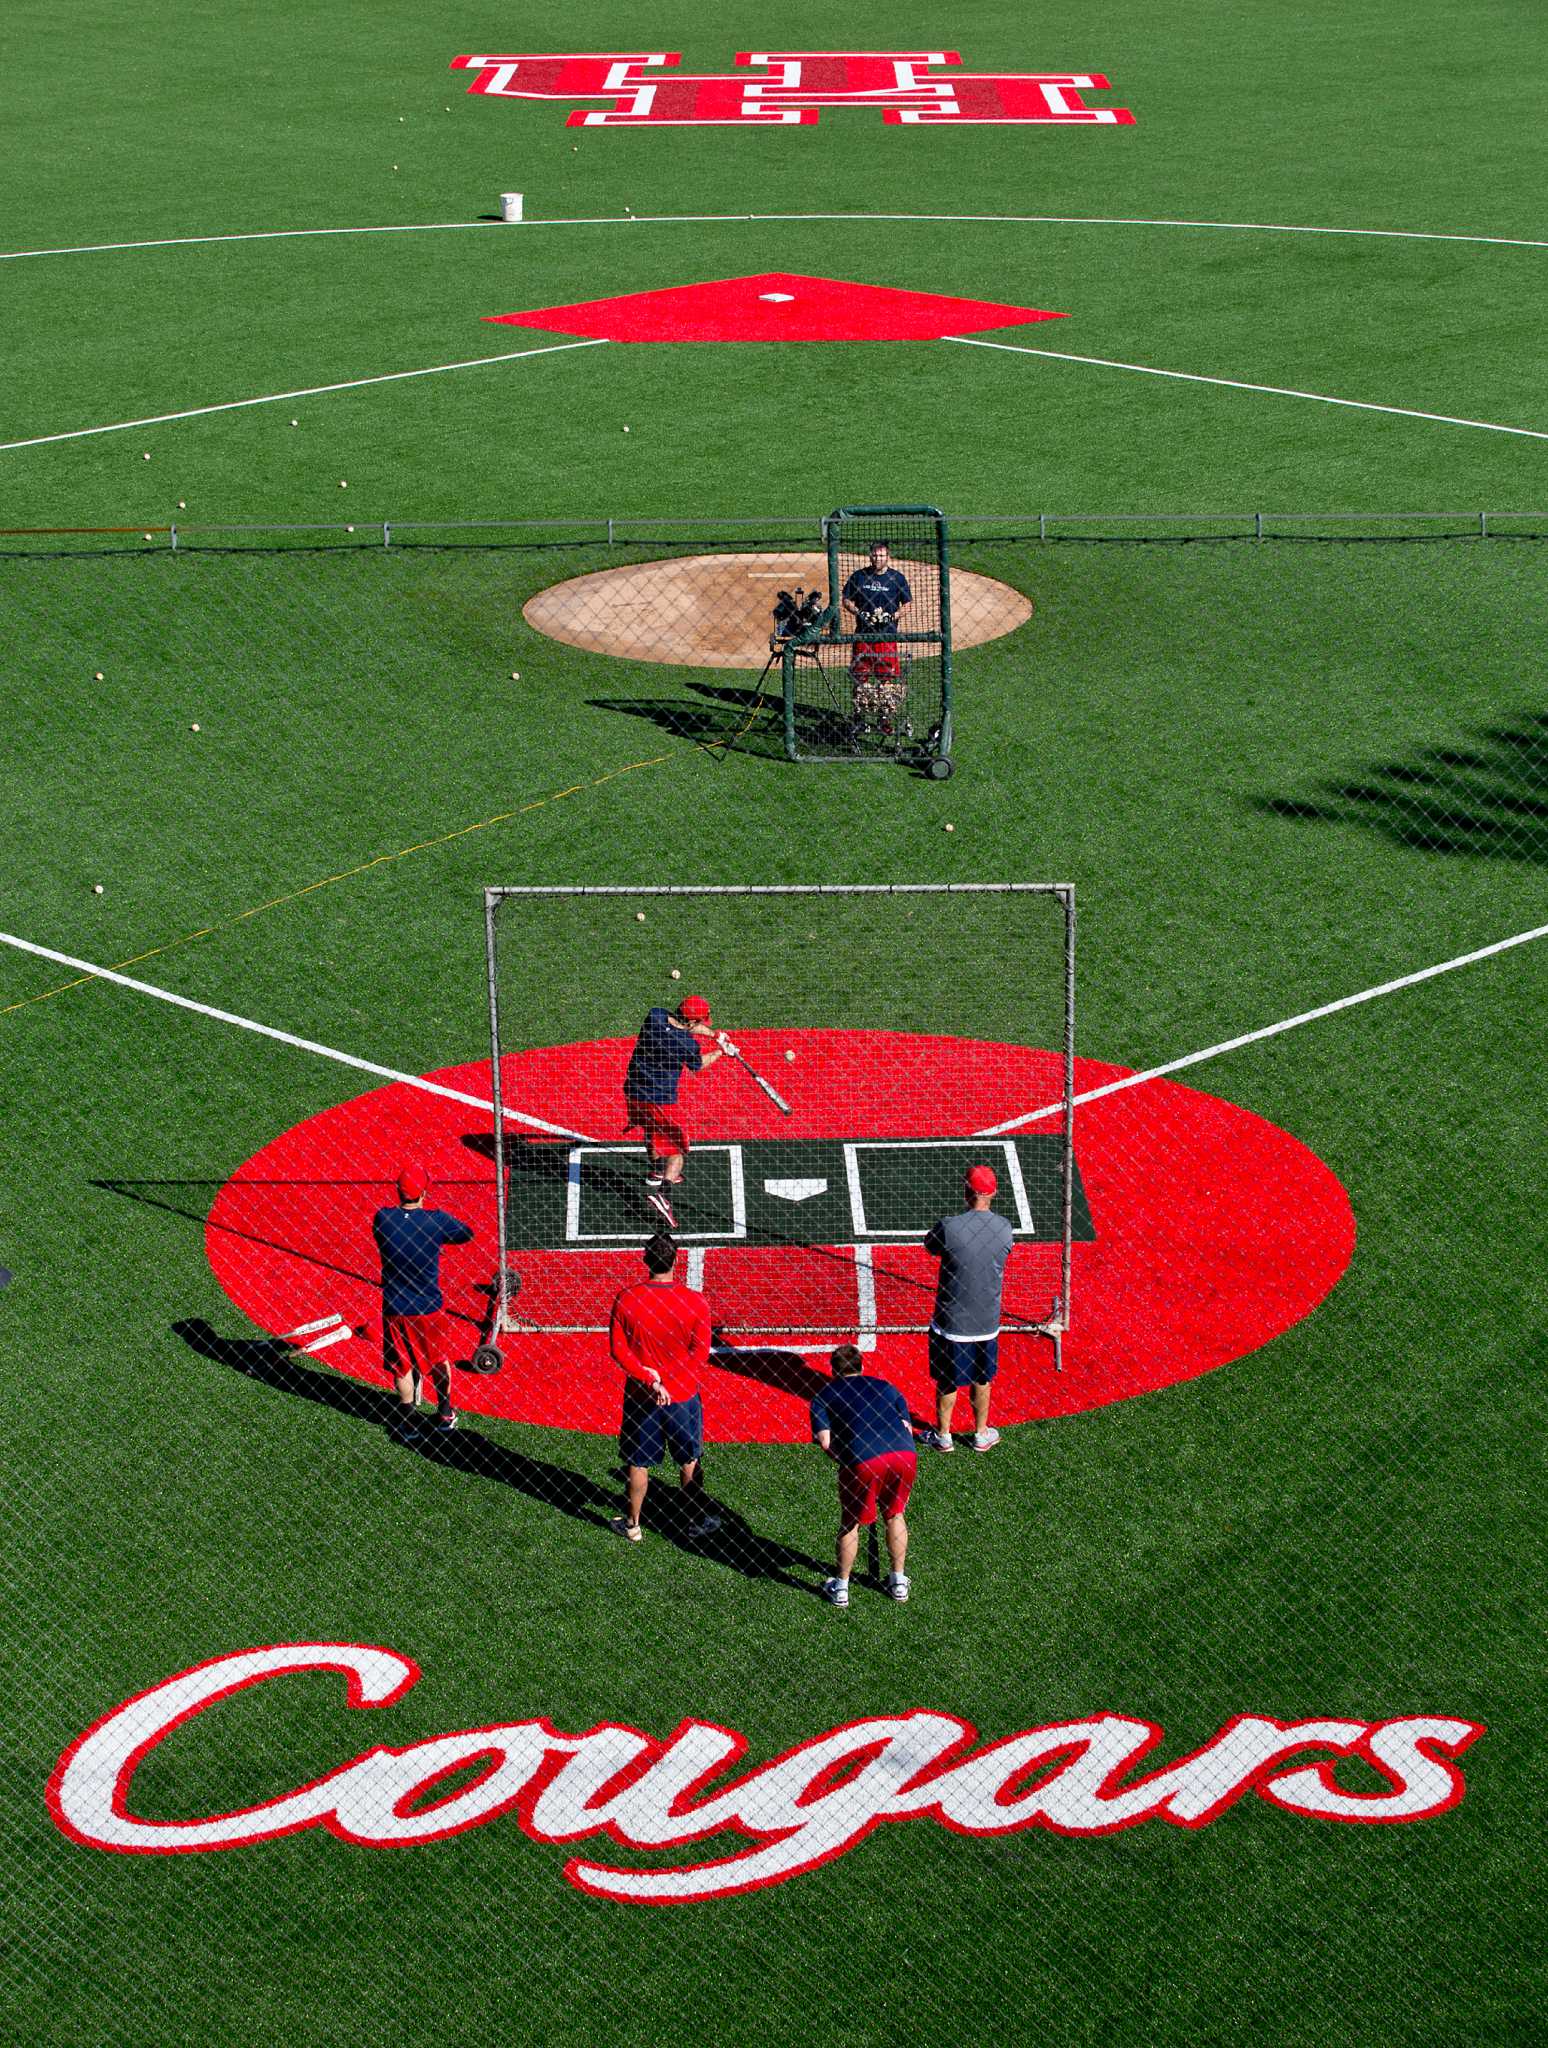 UH baseball field features colorful new look